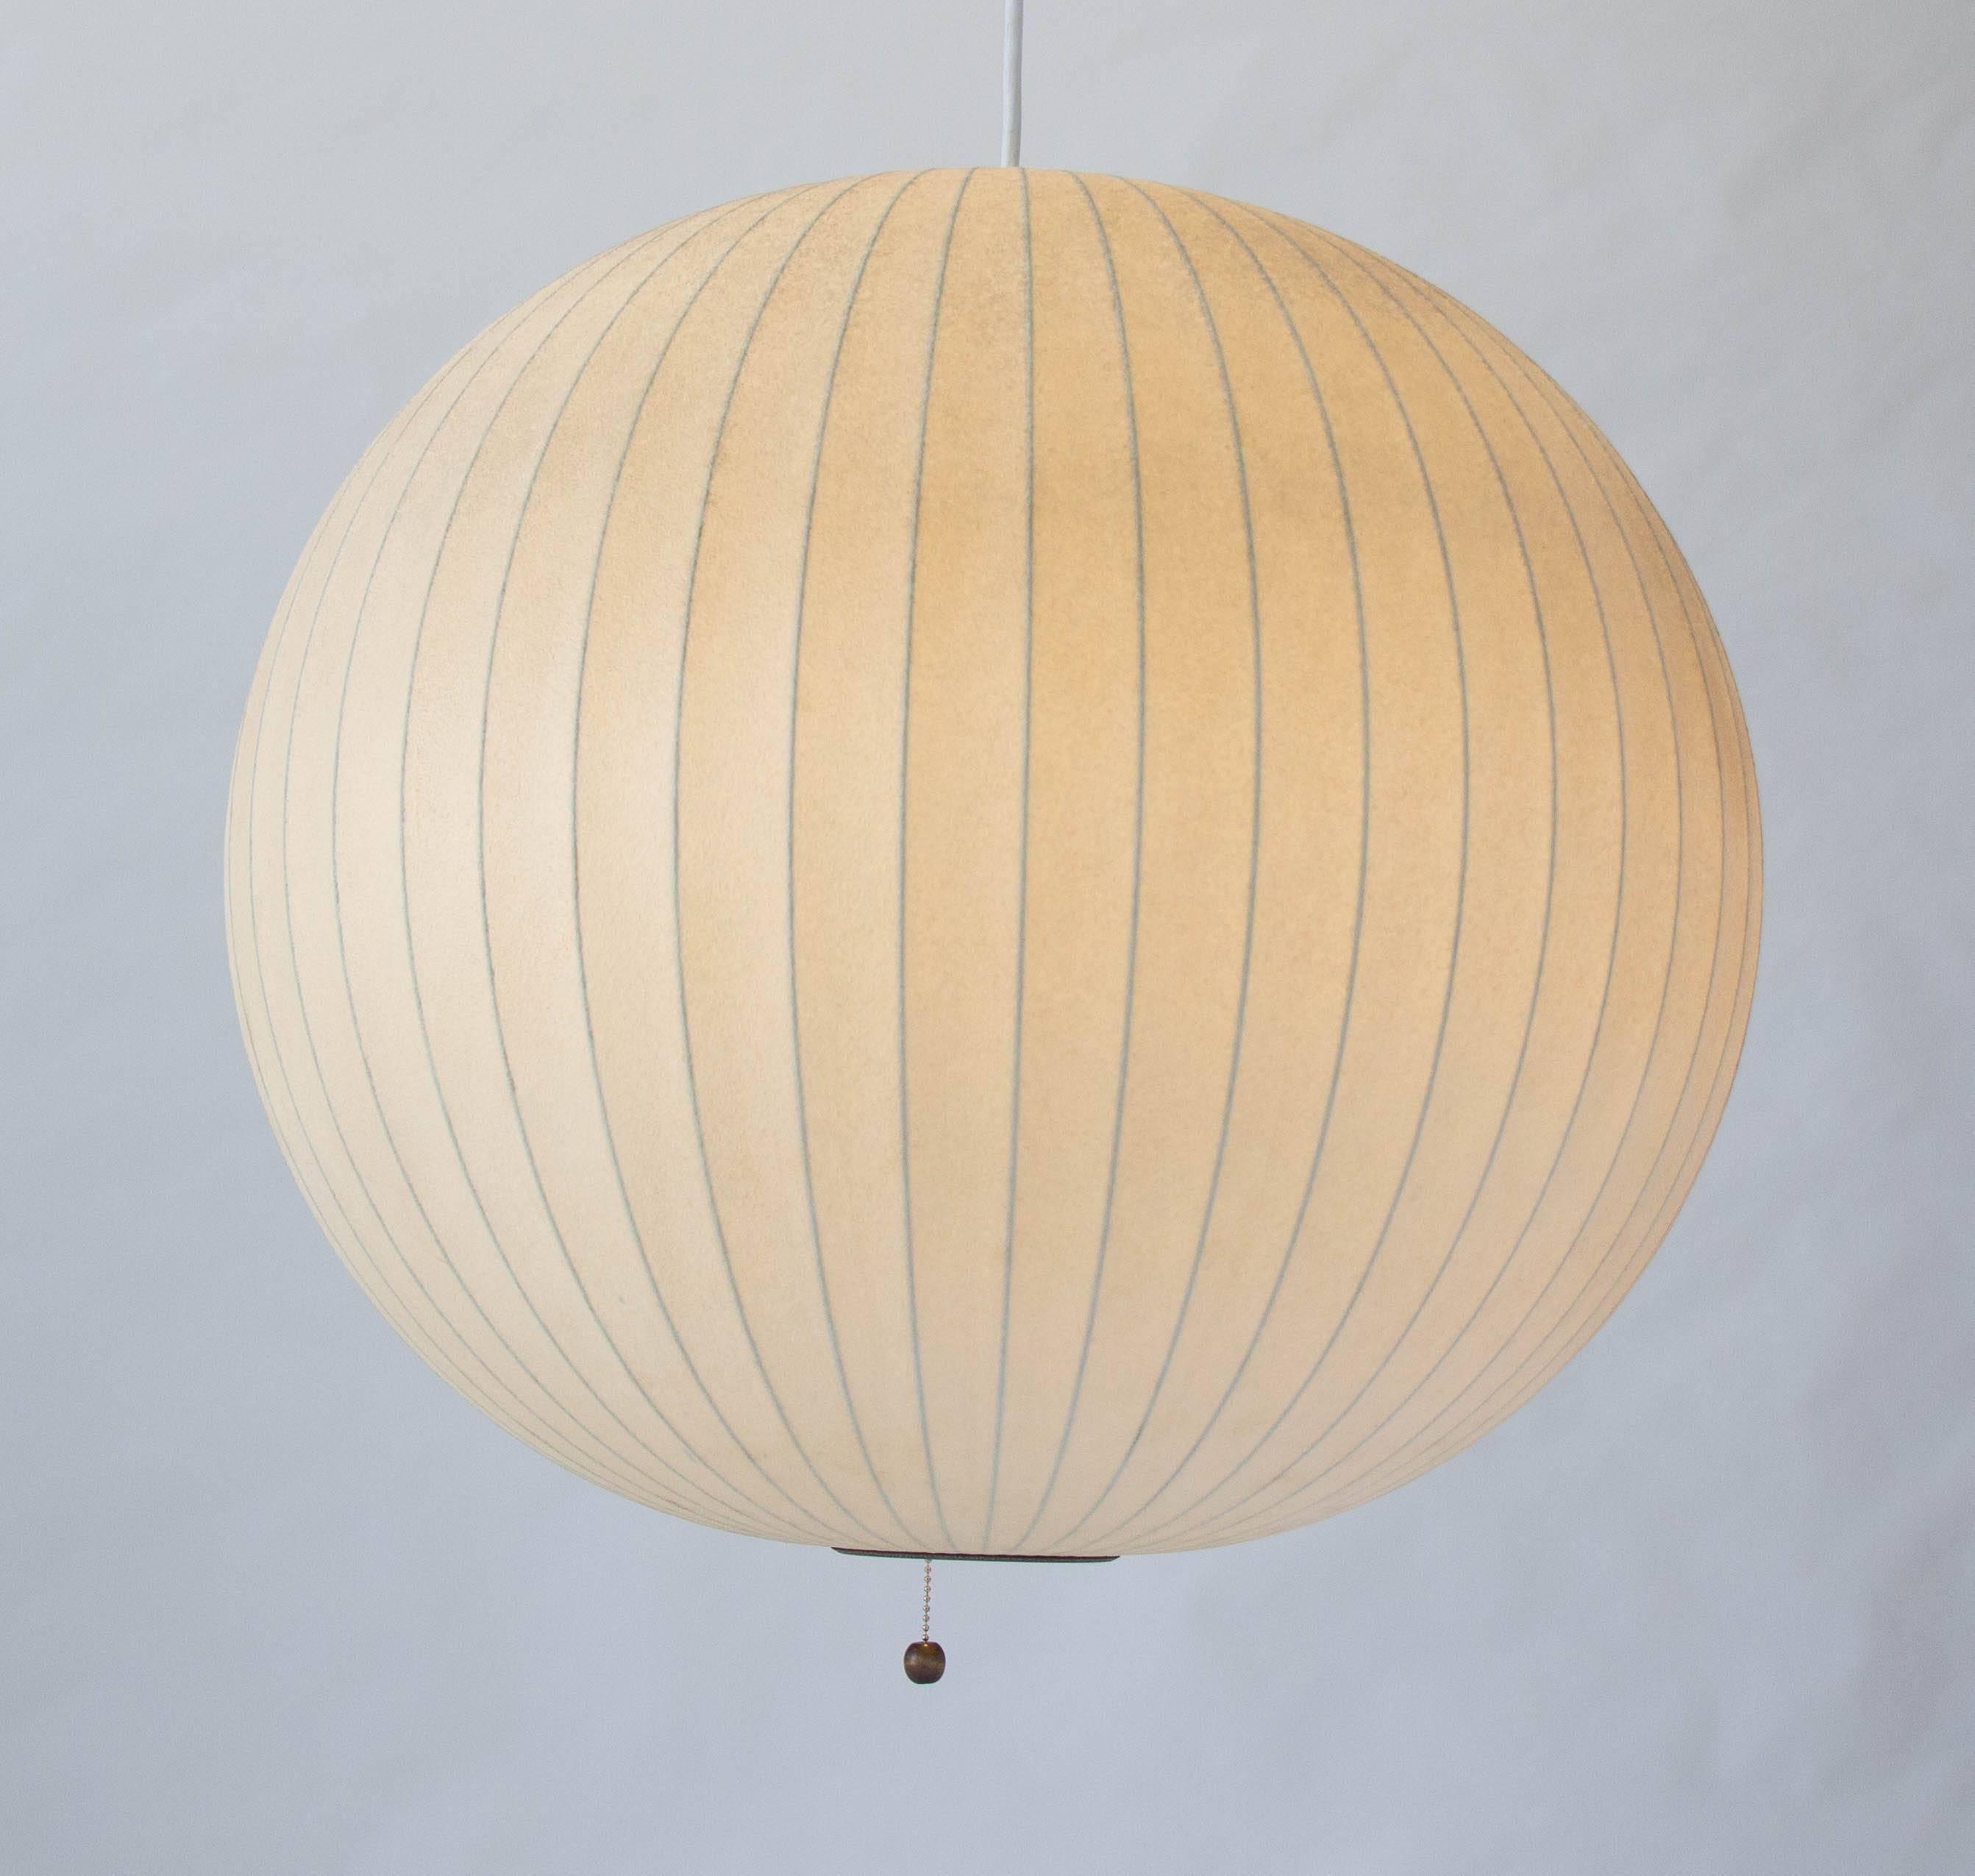 An original H-725 bubble lamp (now referred to as “Ball Pendant” variant) designed by George Nelson for Howard Miller in 1947. The lightweight steel frame is covered in the original plastic webbing with a pull chain to turn the lamp on and off. This